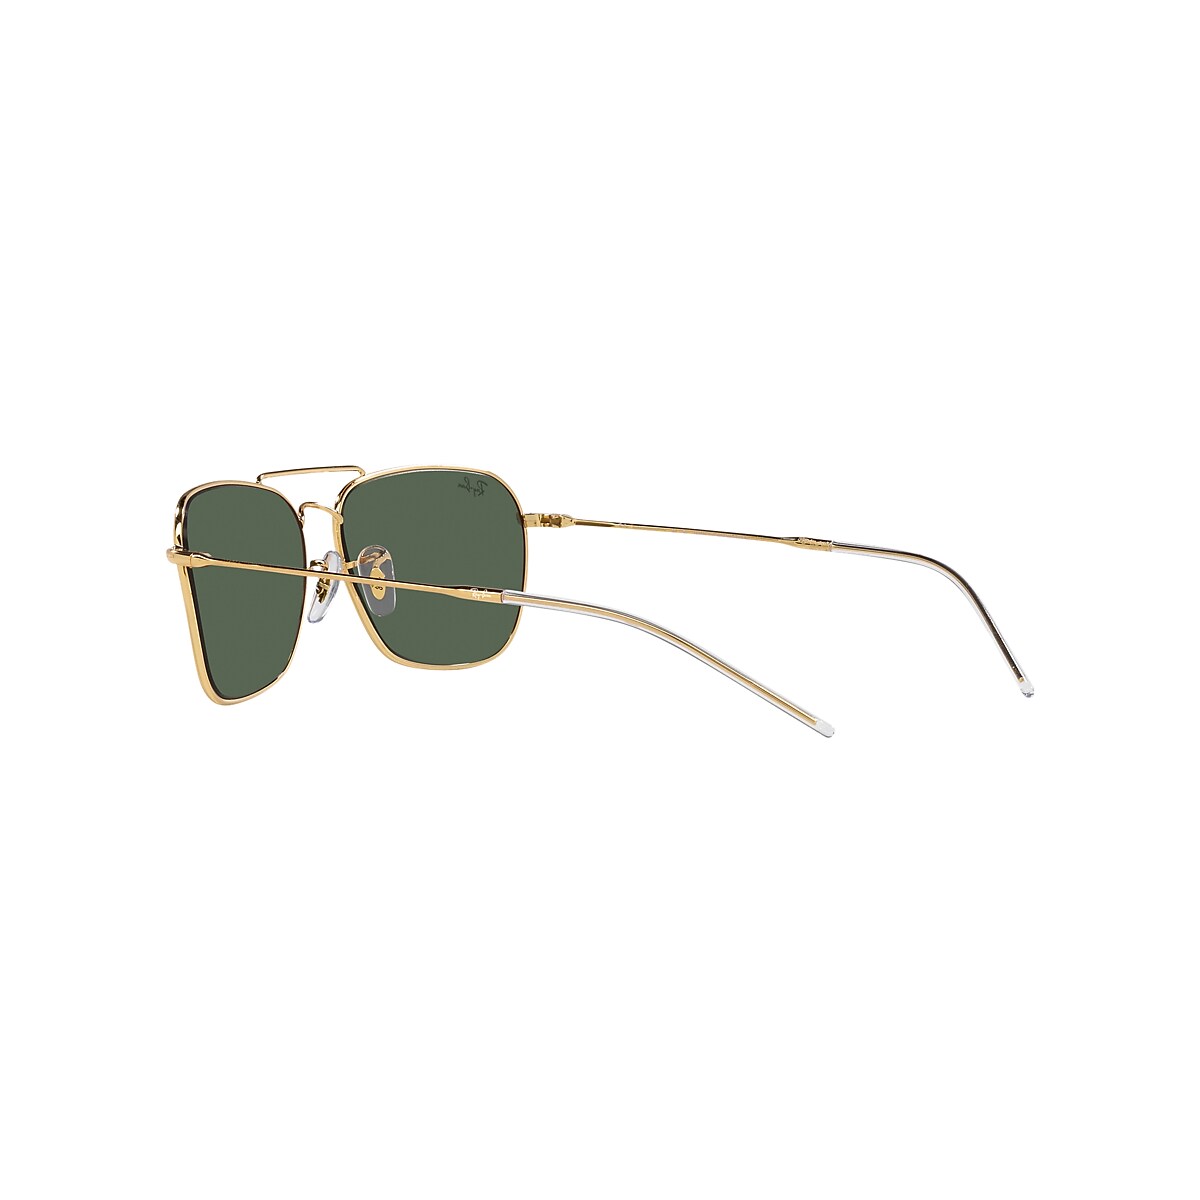 CARAVAN REVERSE Sunglasses in Gold and Green - RBR0102S 